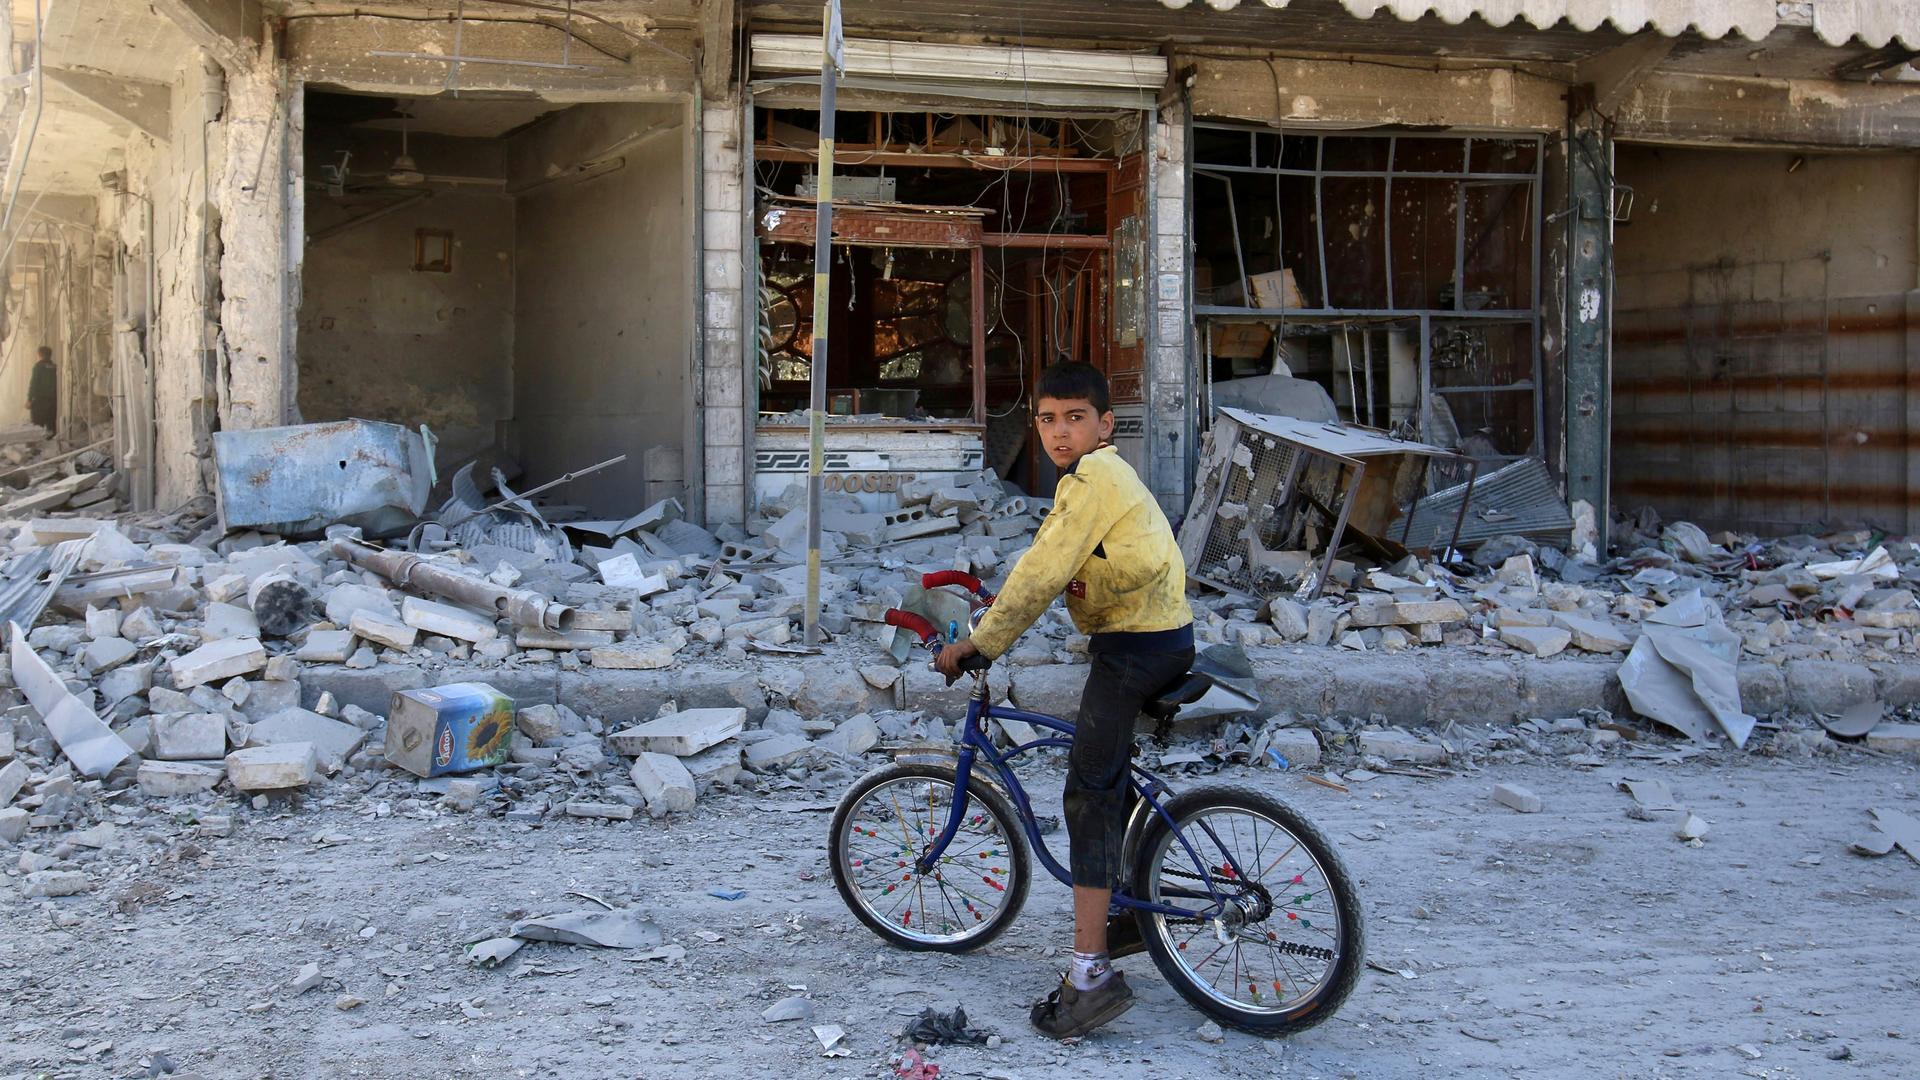 A boy sits on a bicycle in front of damaged shops after an airstrike on the rebel held al-Qaterji neighborhood of Aleppo, Syria.